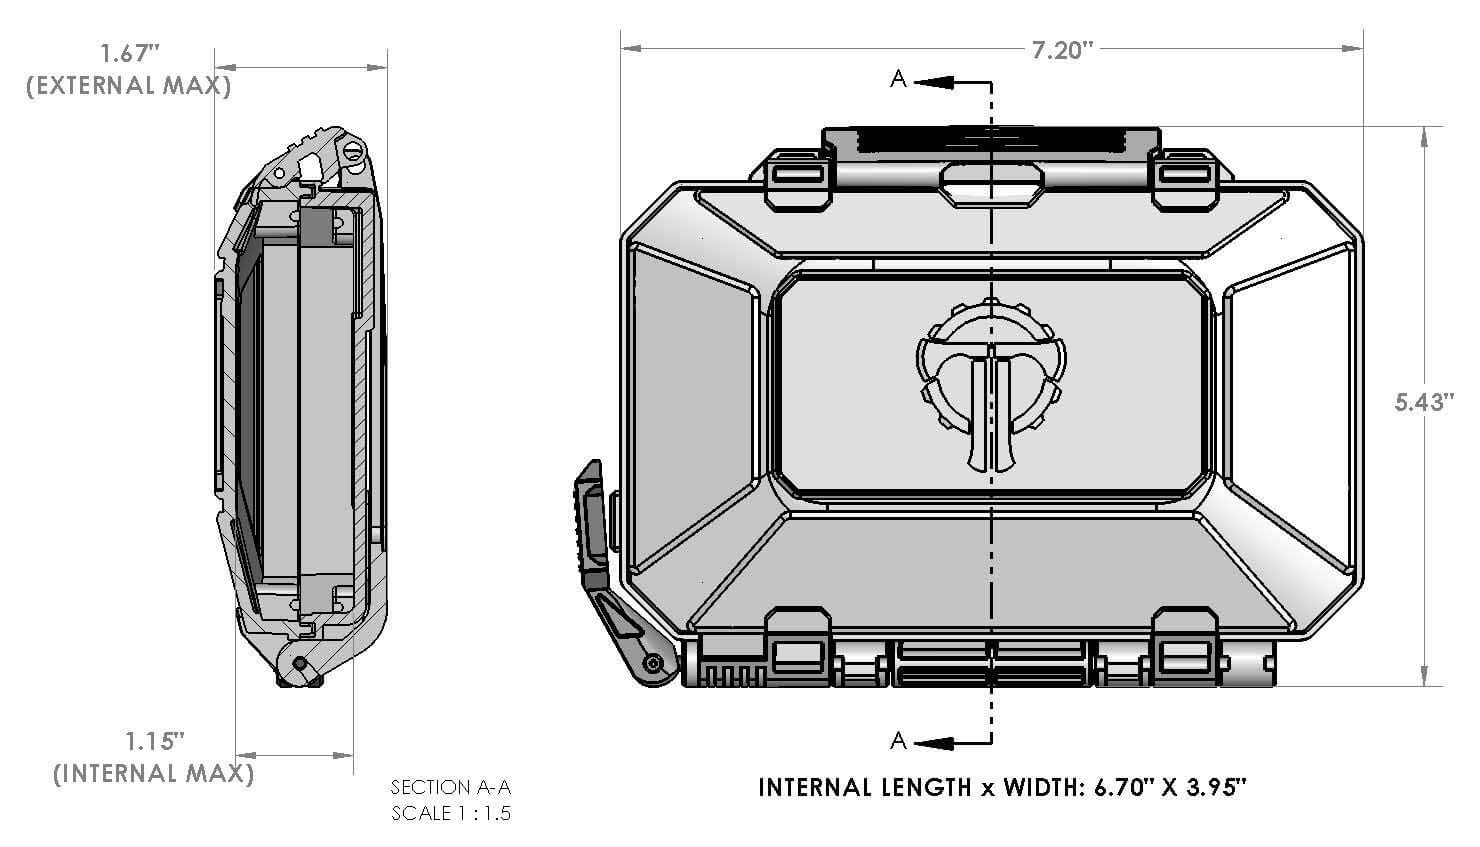 Diagram showing internal and external dimensions of the DarkVault Critical Gear Case